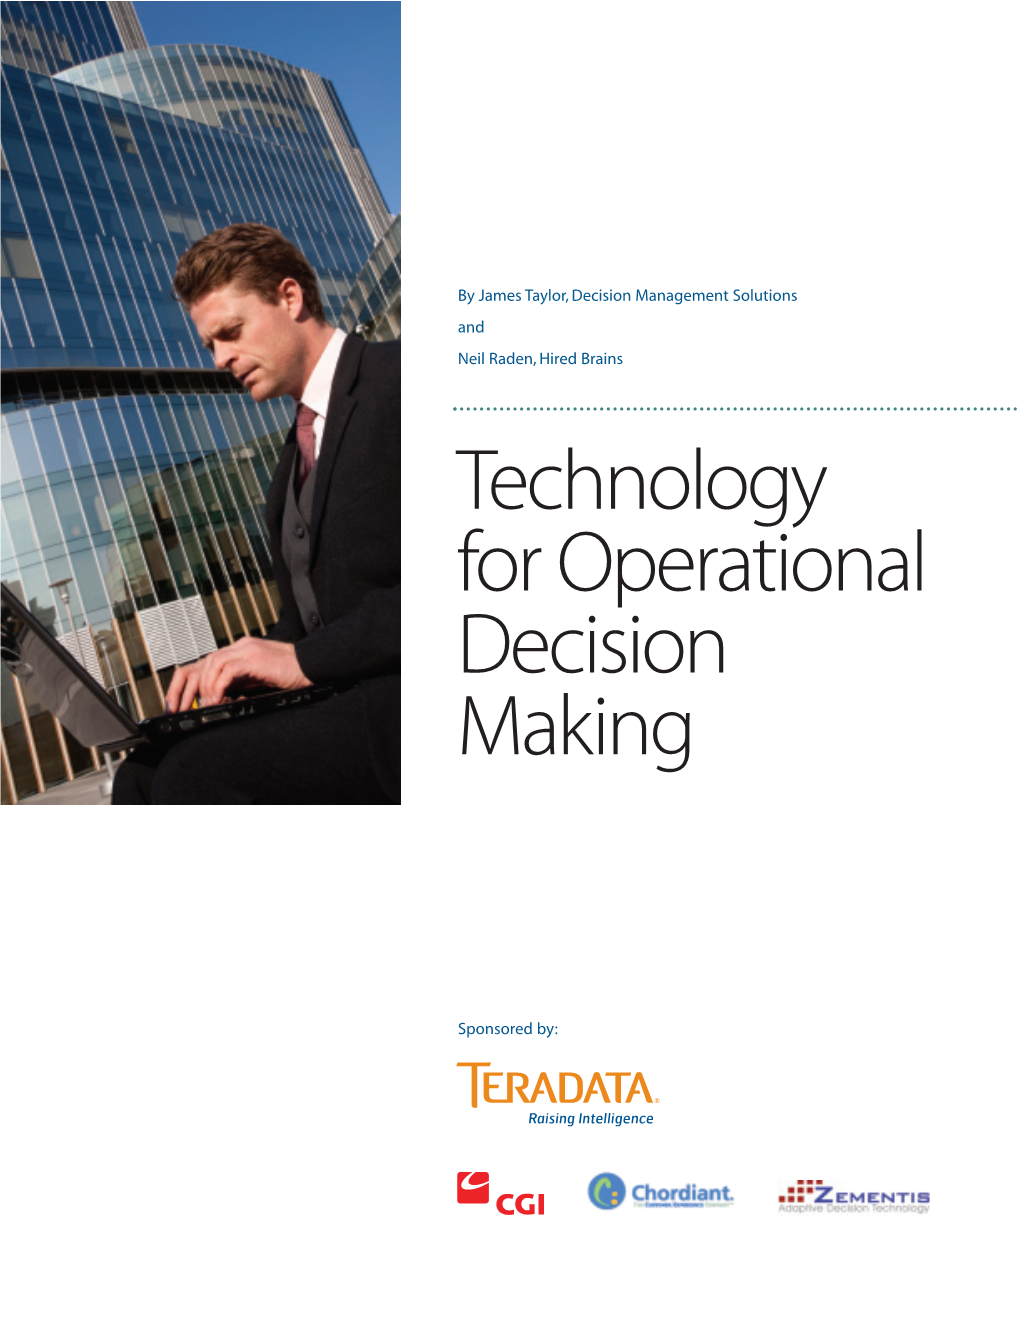 Technology for Operational Decision Making